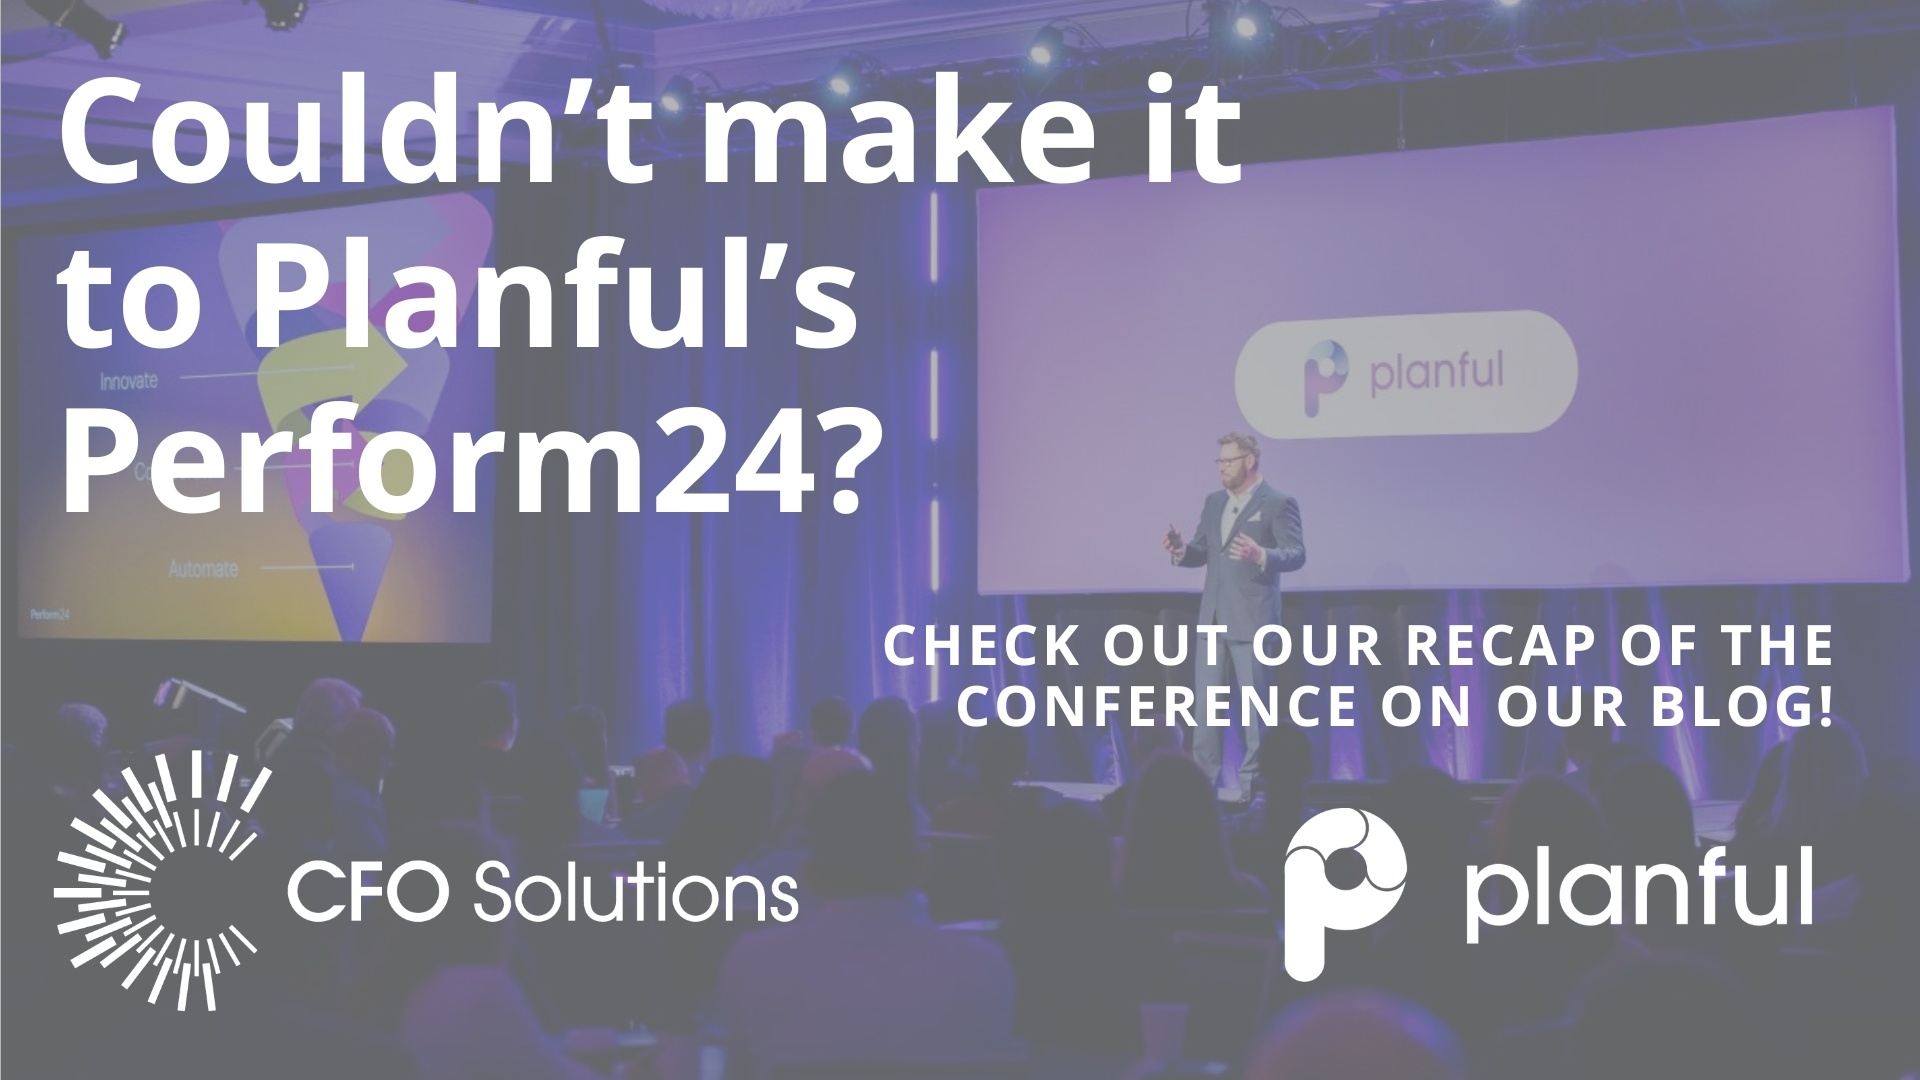 If you couldn't make it to Planful's Perform24 conference, check out our recap here.